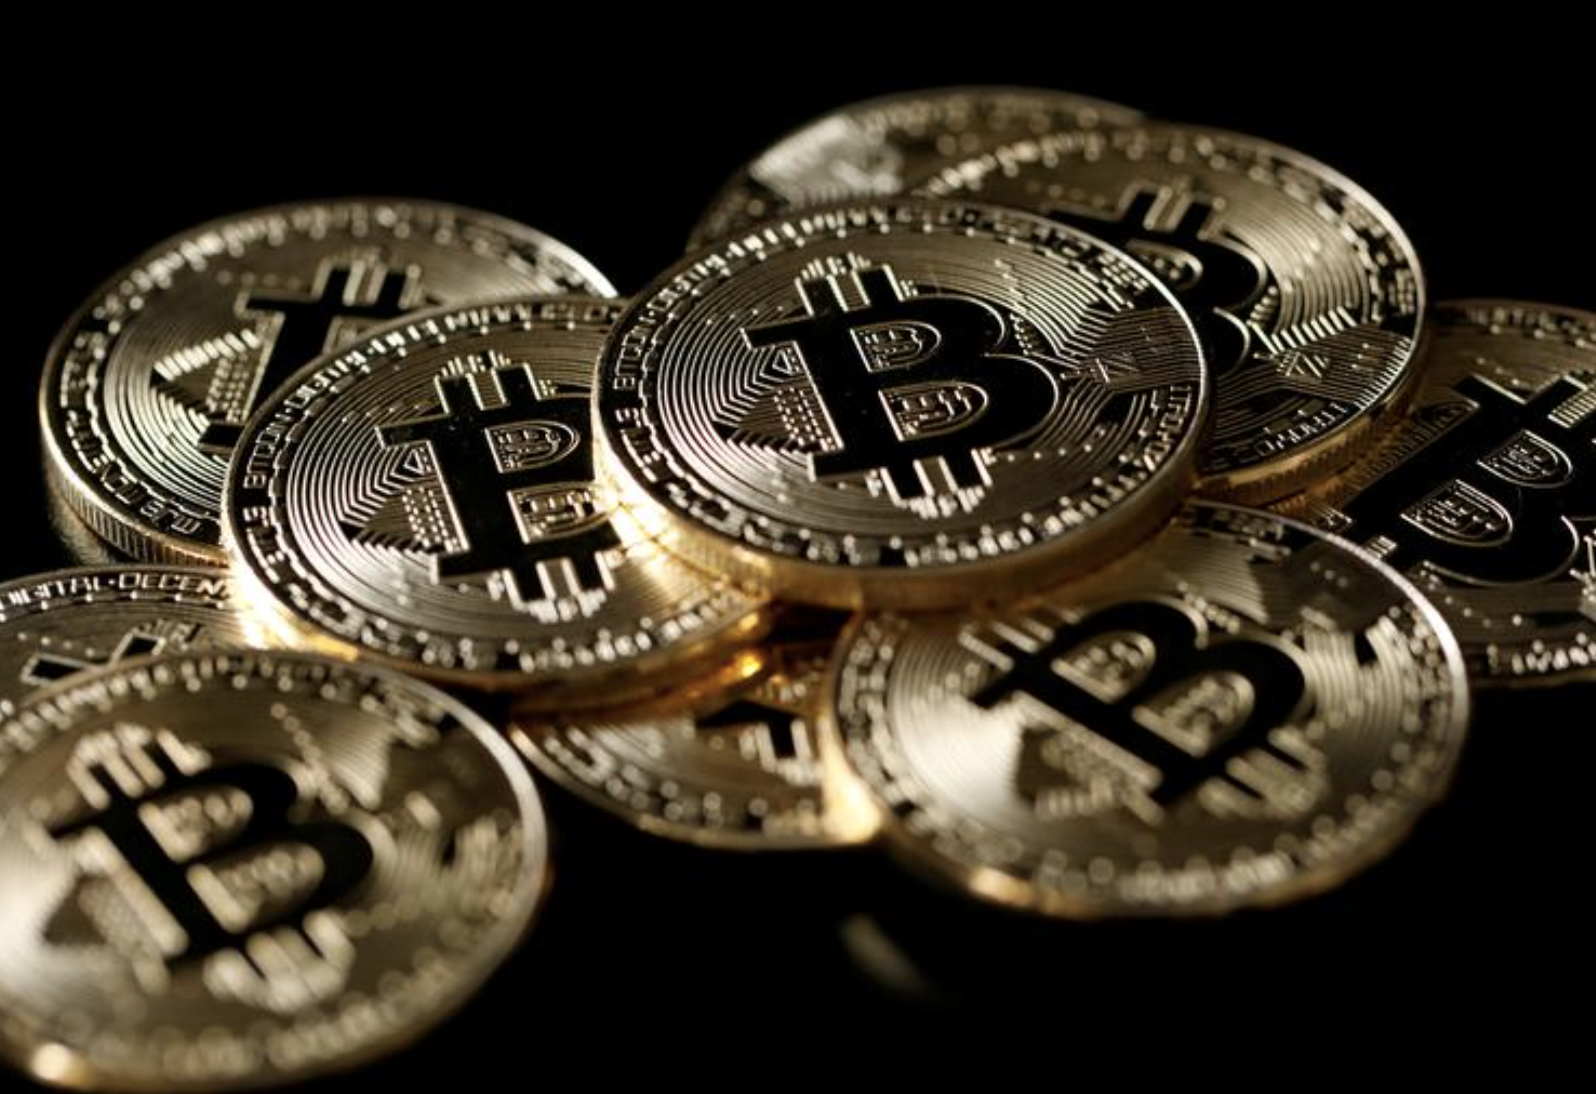 Bitcoin falls back sharply after weekend record